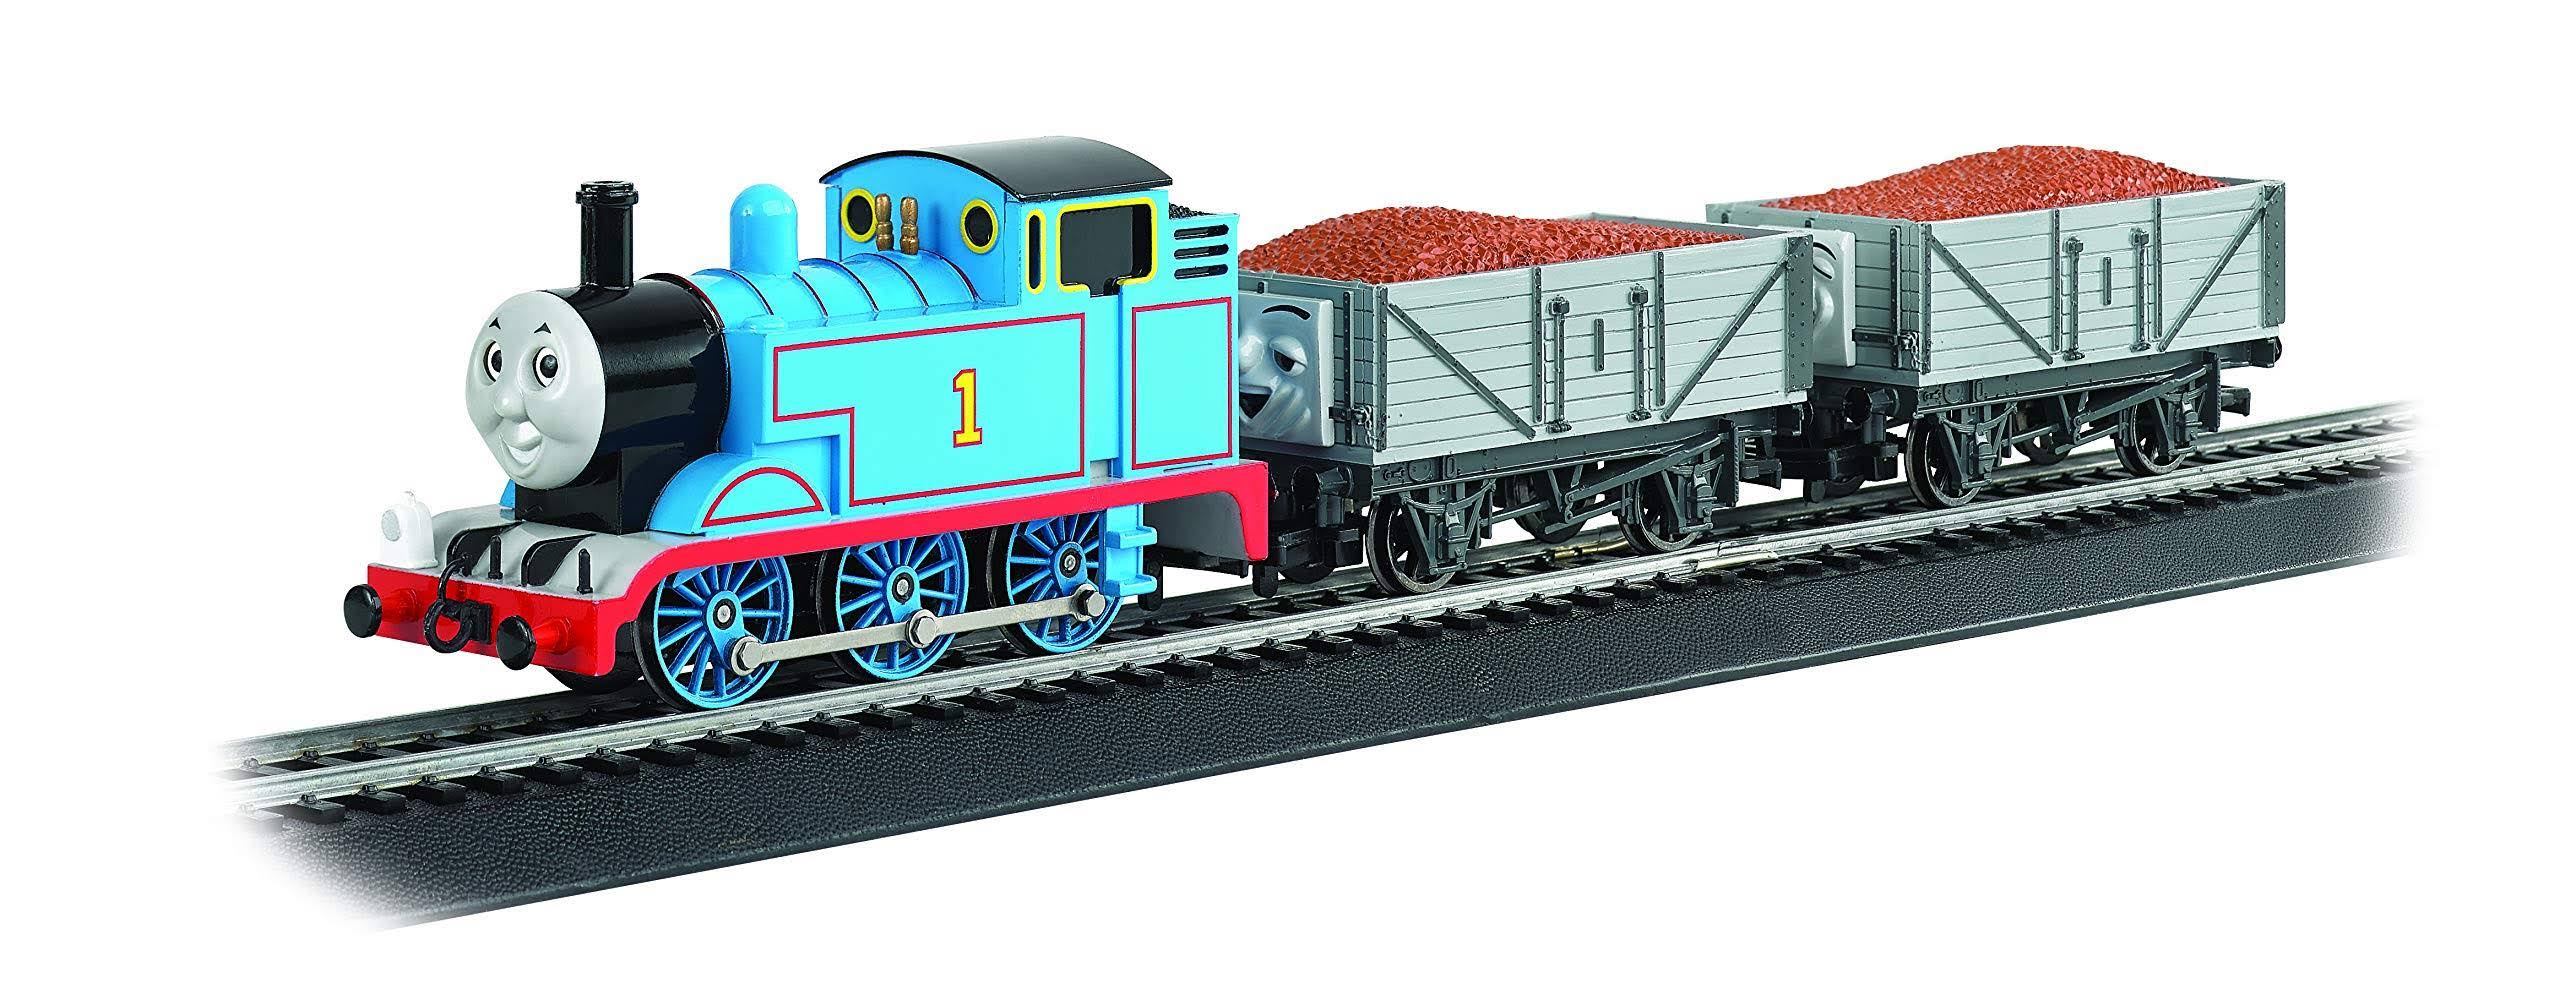 Bachmann HO Deluxe Thomas w/The Troublesome Trucks Freight Train Set